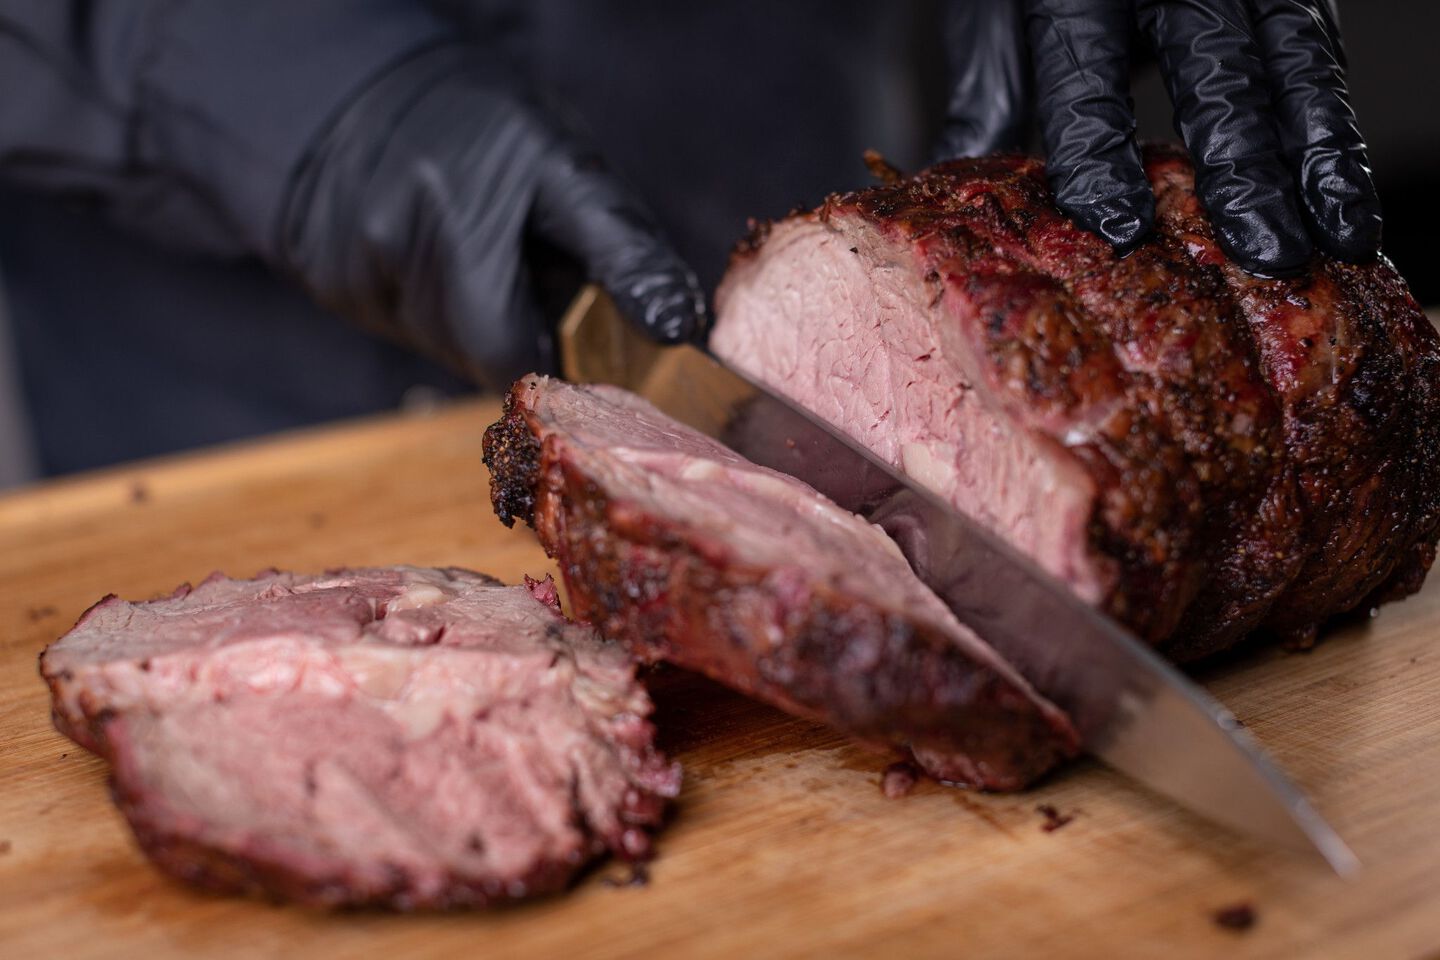 Chef de-boning and carving a portion of barbecued prime rib steak